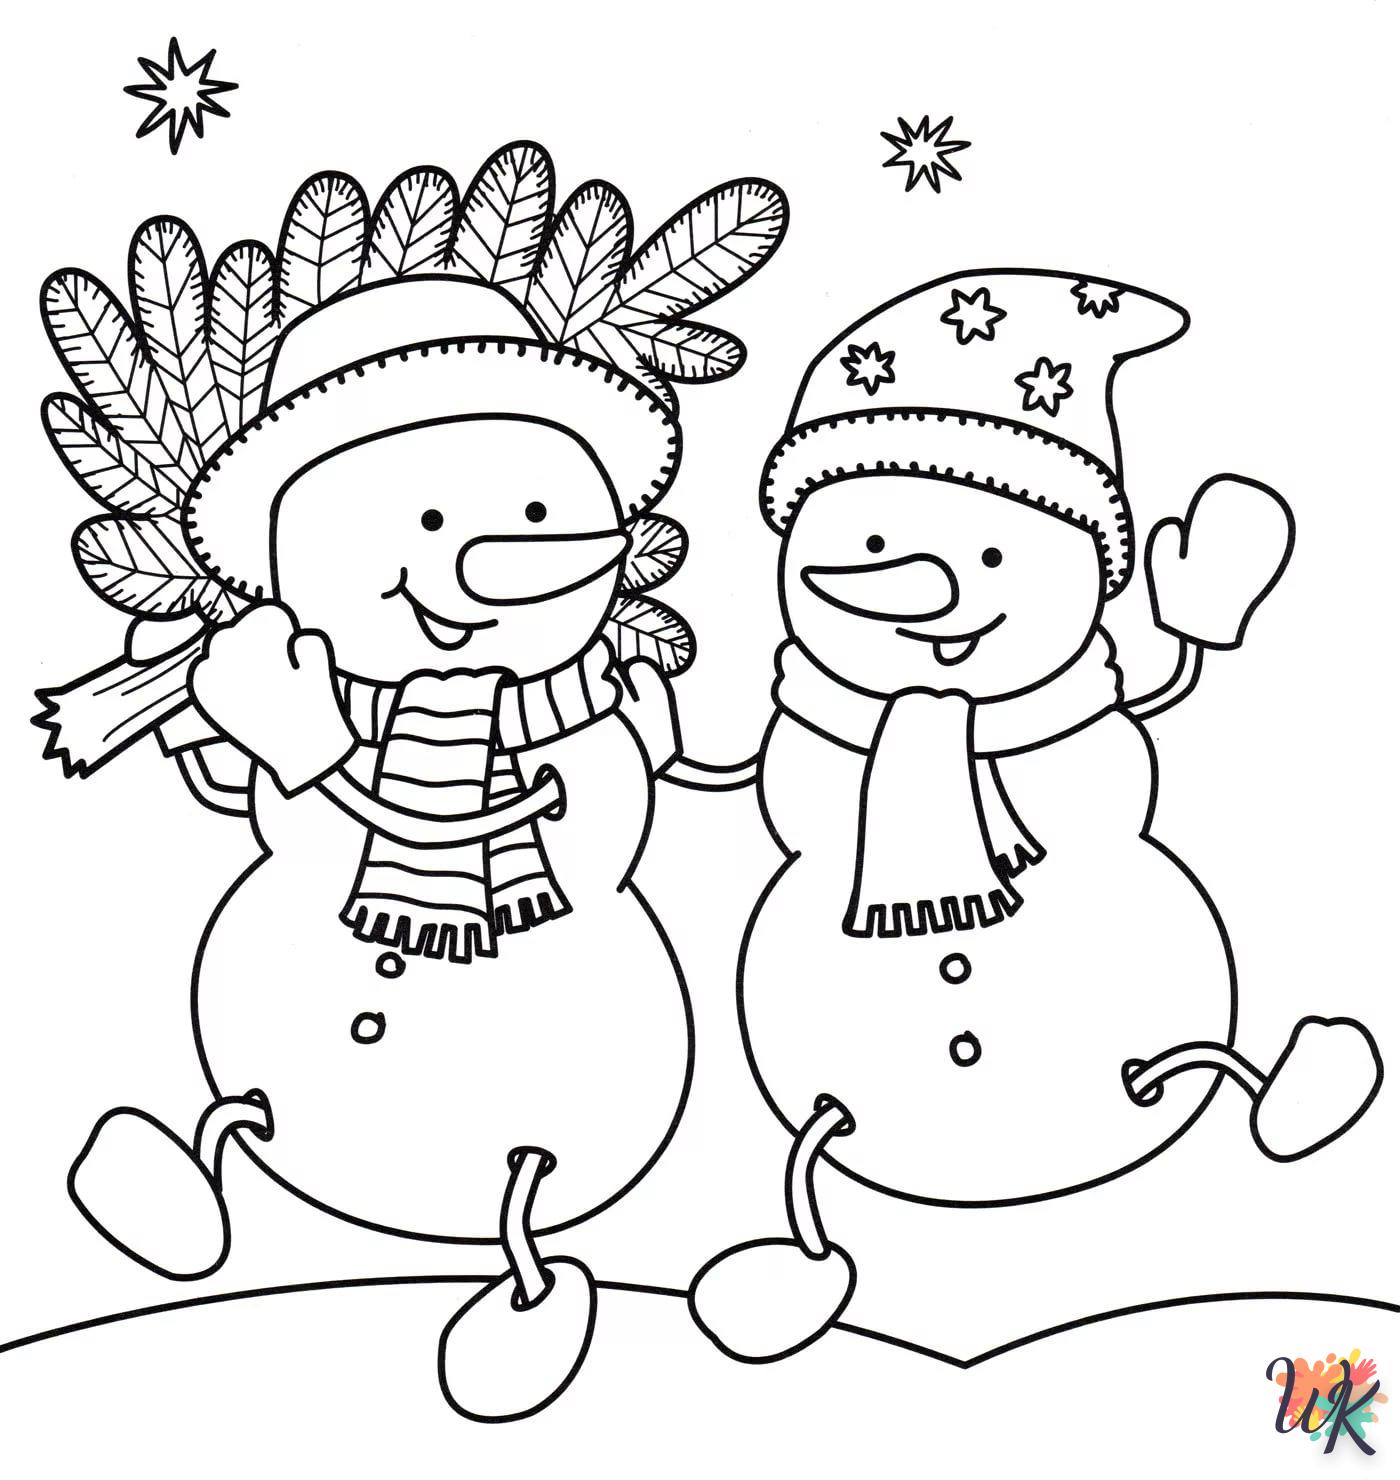 Snowman coloring page for children to download